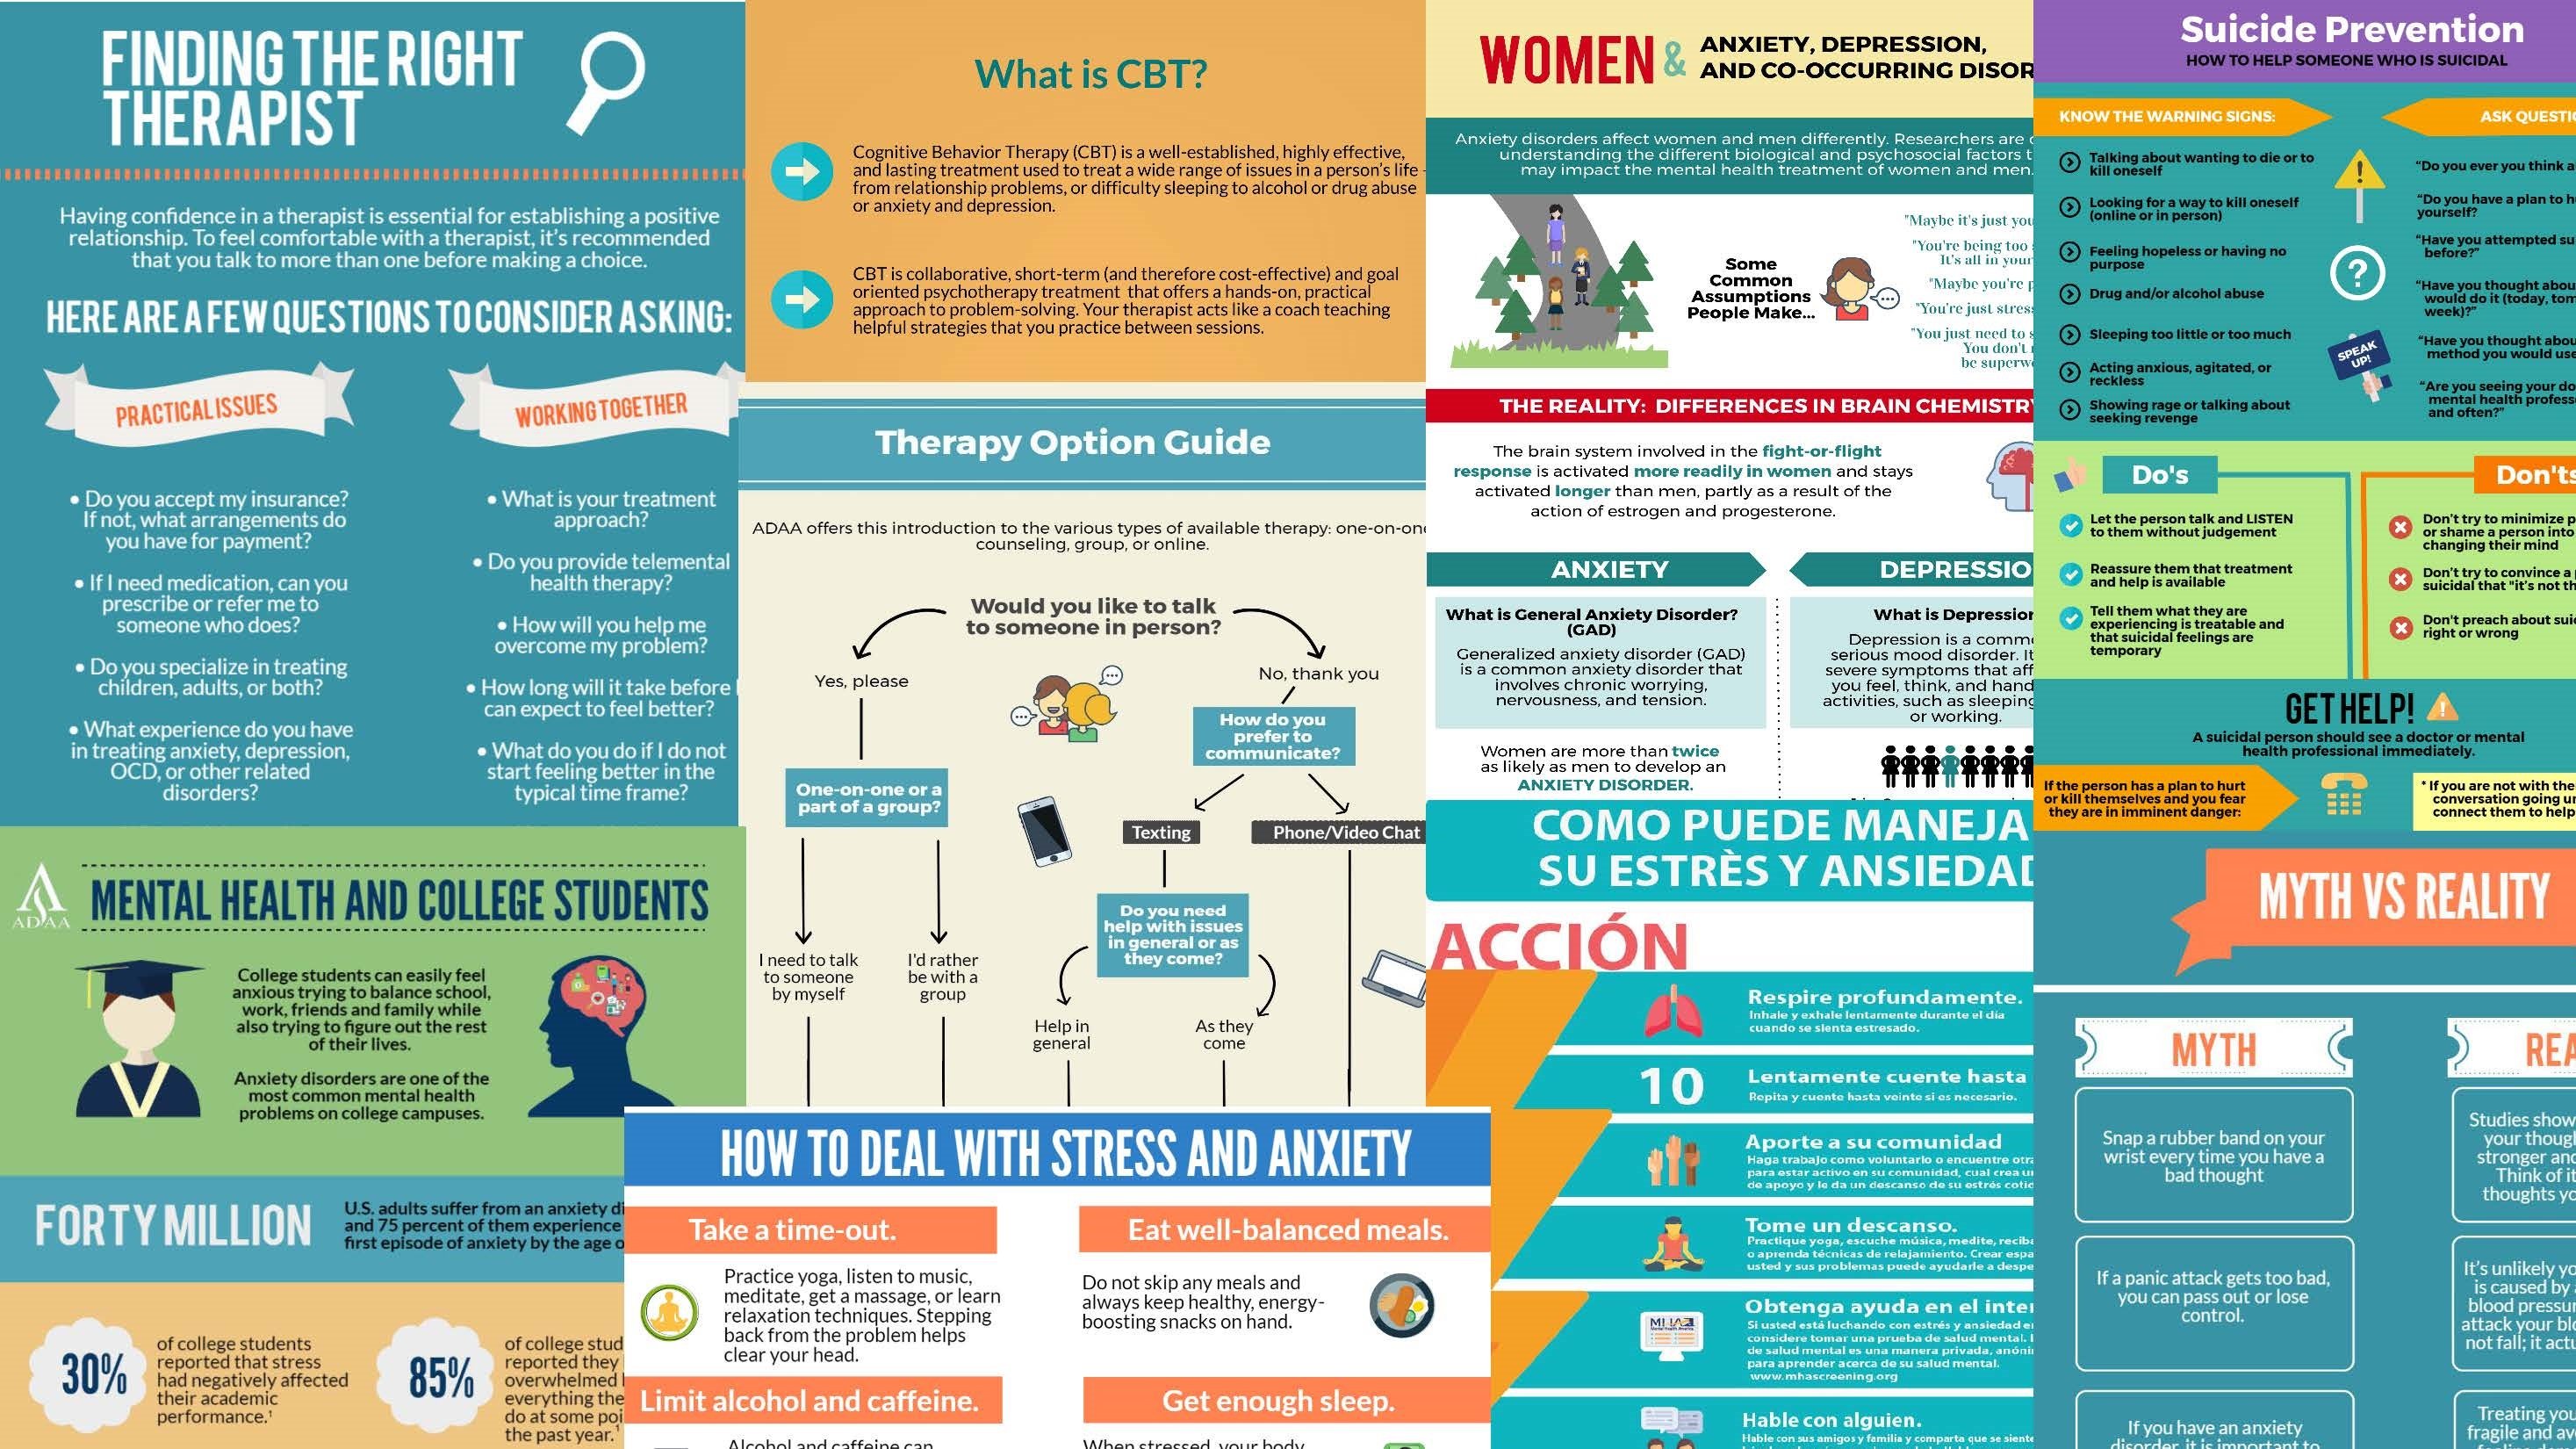 How To Make An Infographic On Anxiety